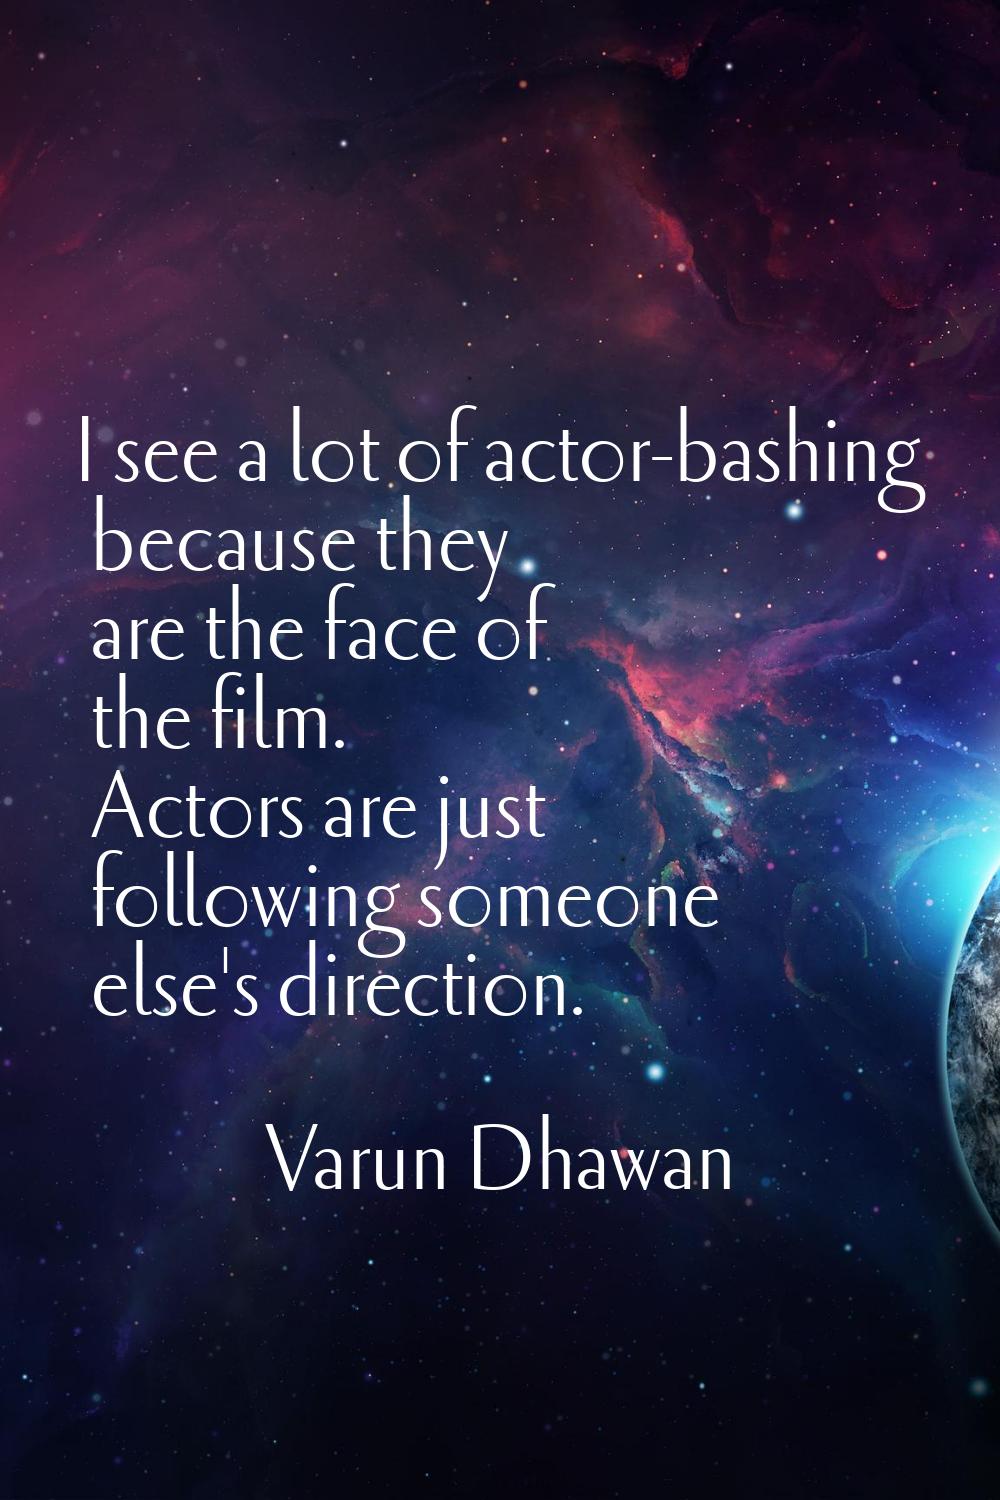 I see a lot of actor-bashing because they are the face of the film. Actors are just following someo